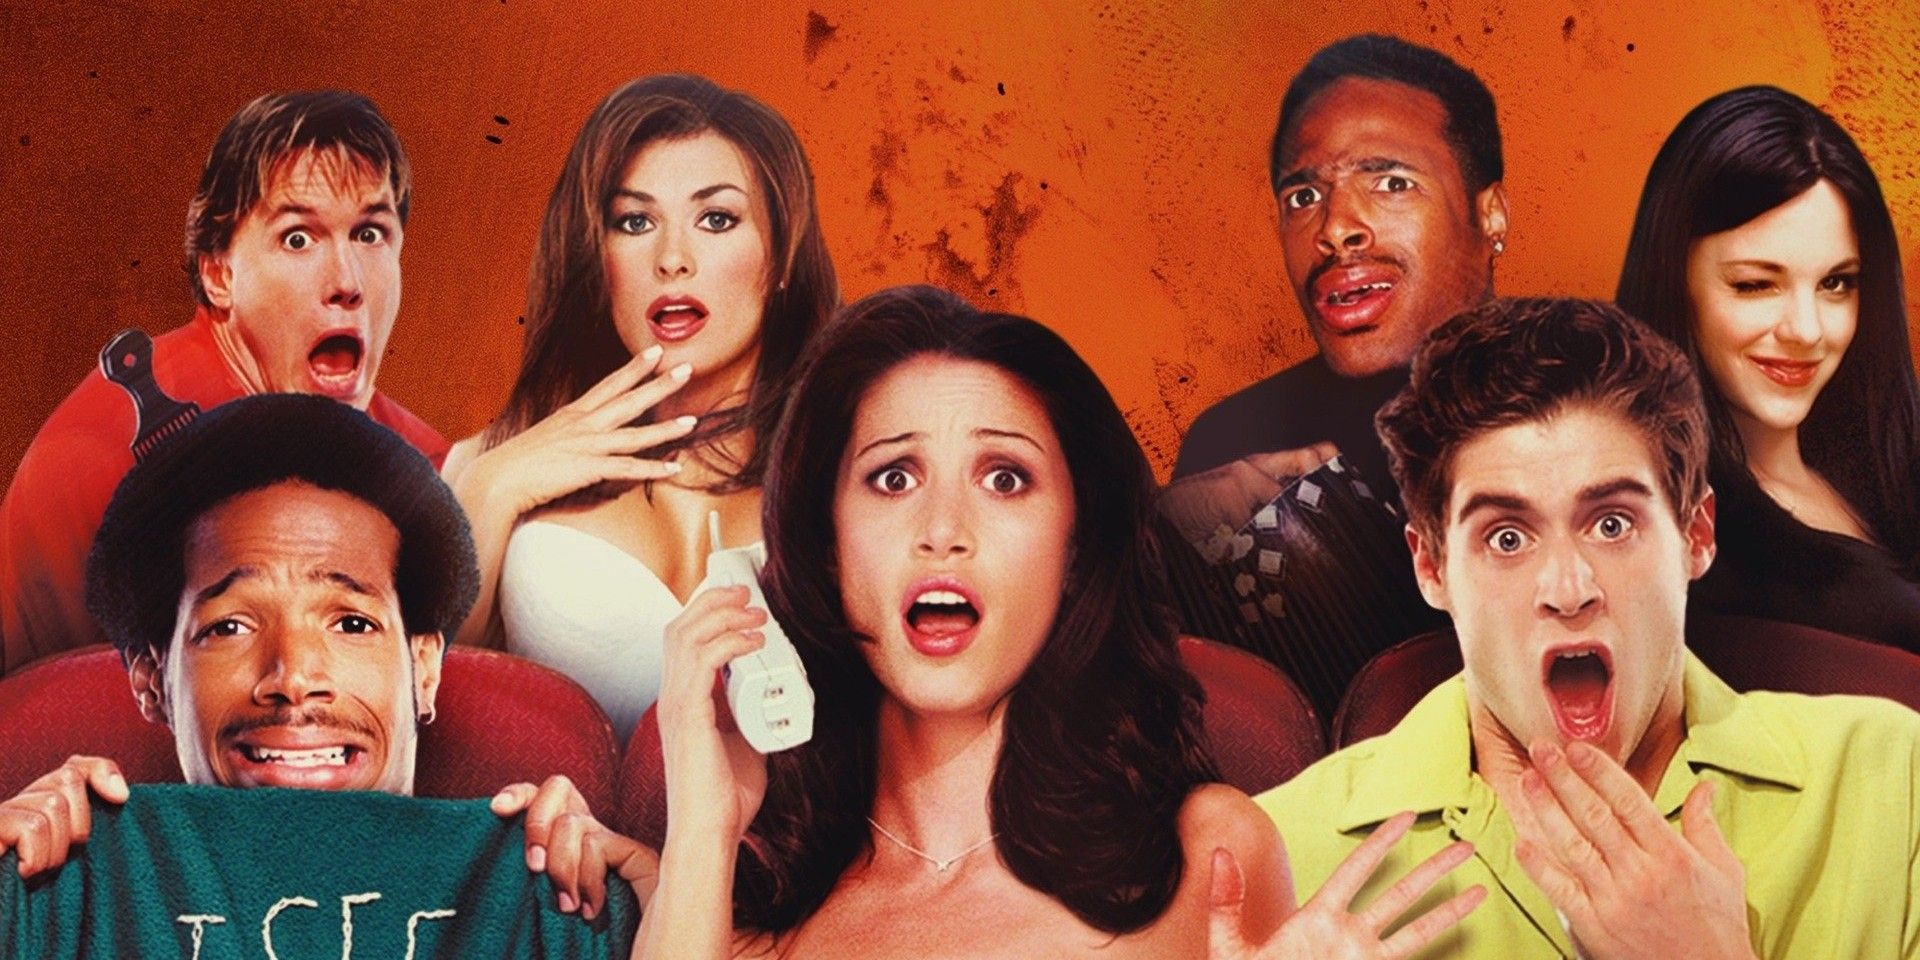 The cast of Scary Movie look to the camera mid-scream.